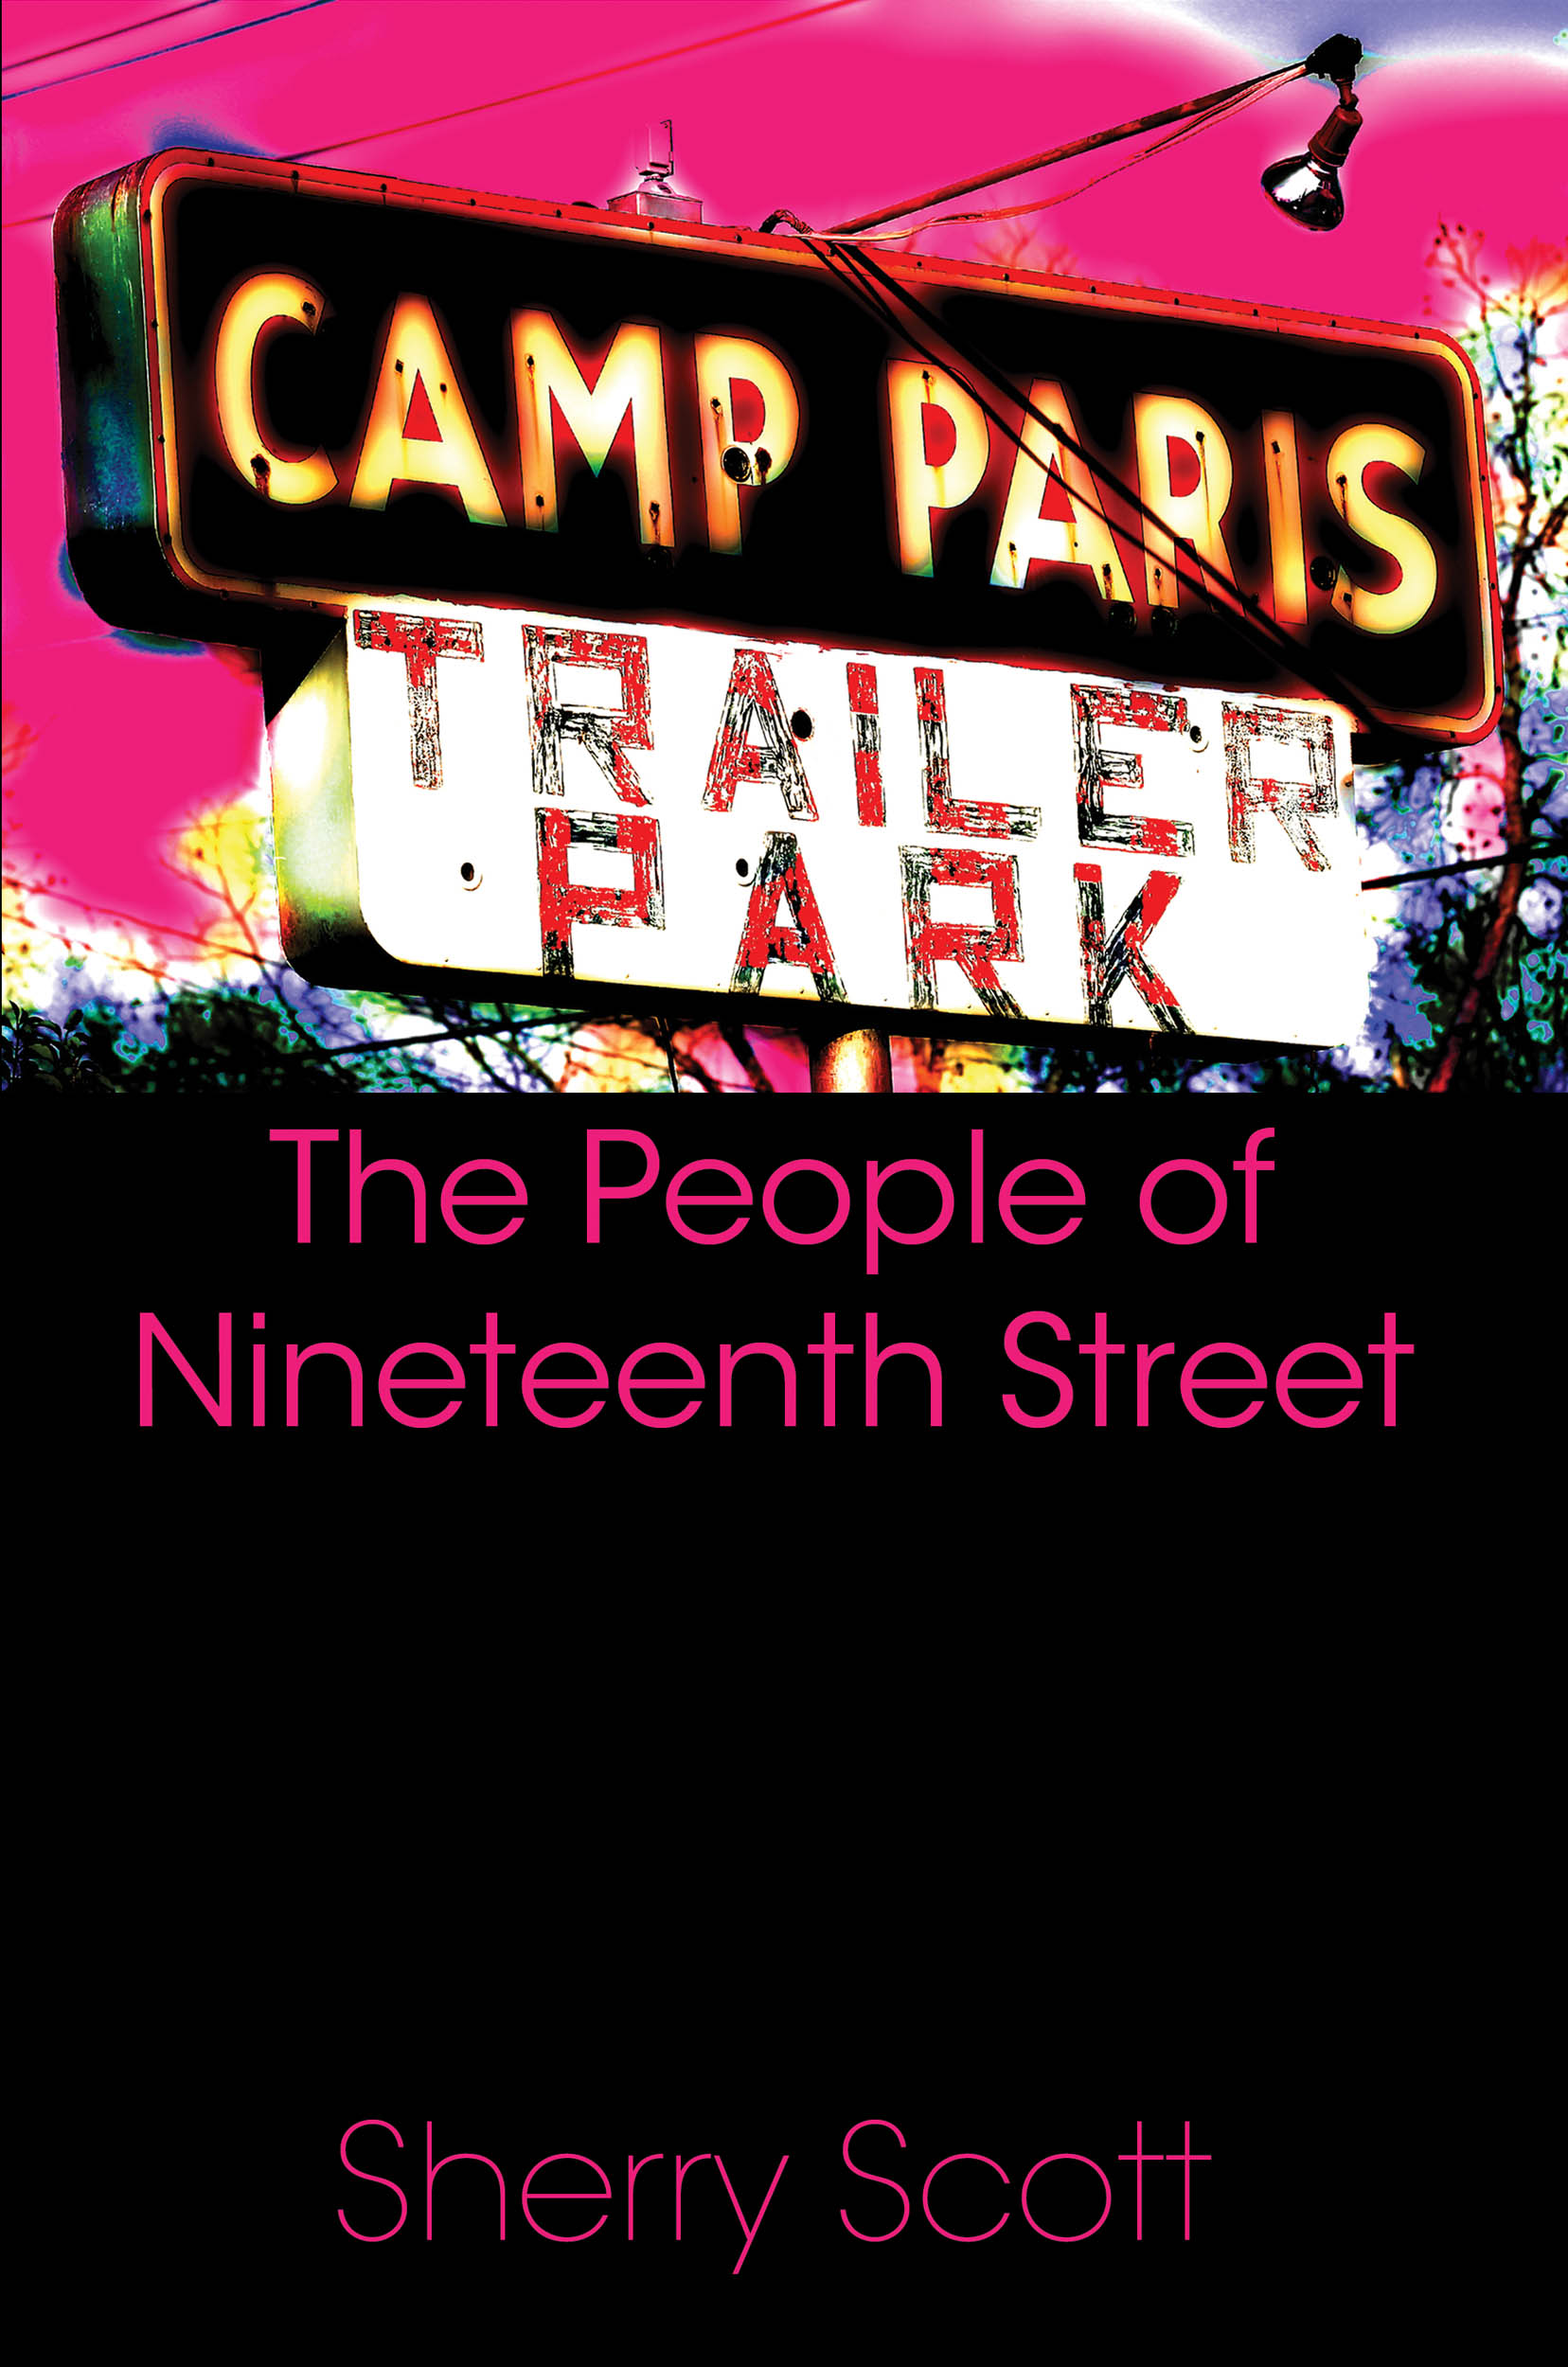 FREE: The People of Nineteenth Street by Sherry Scott